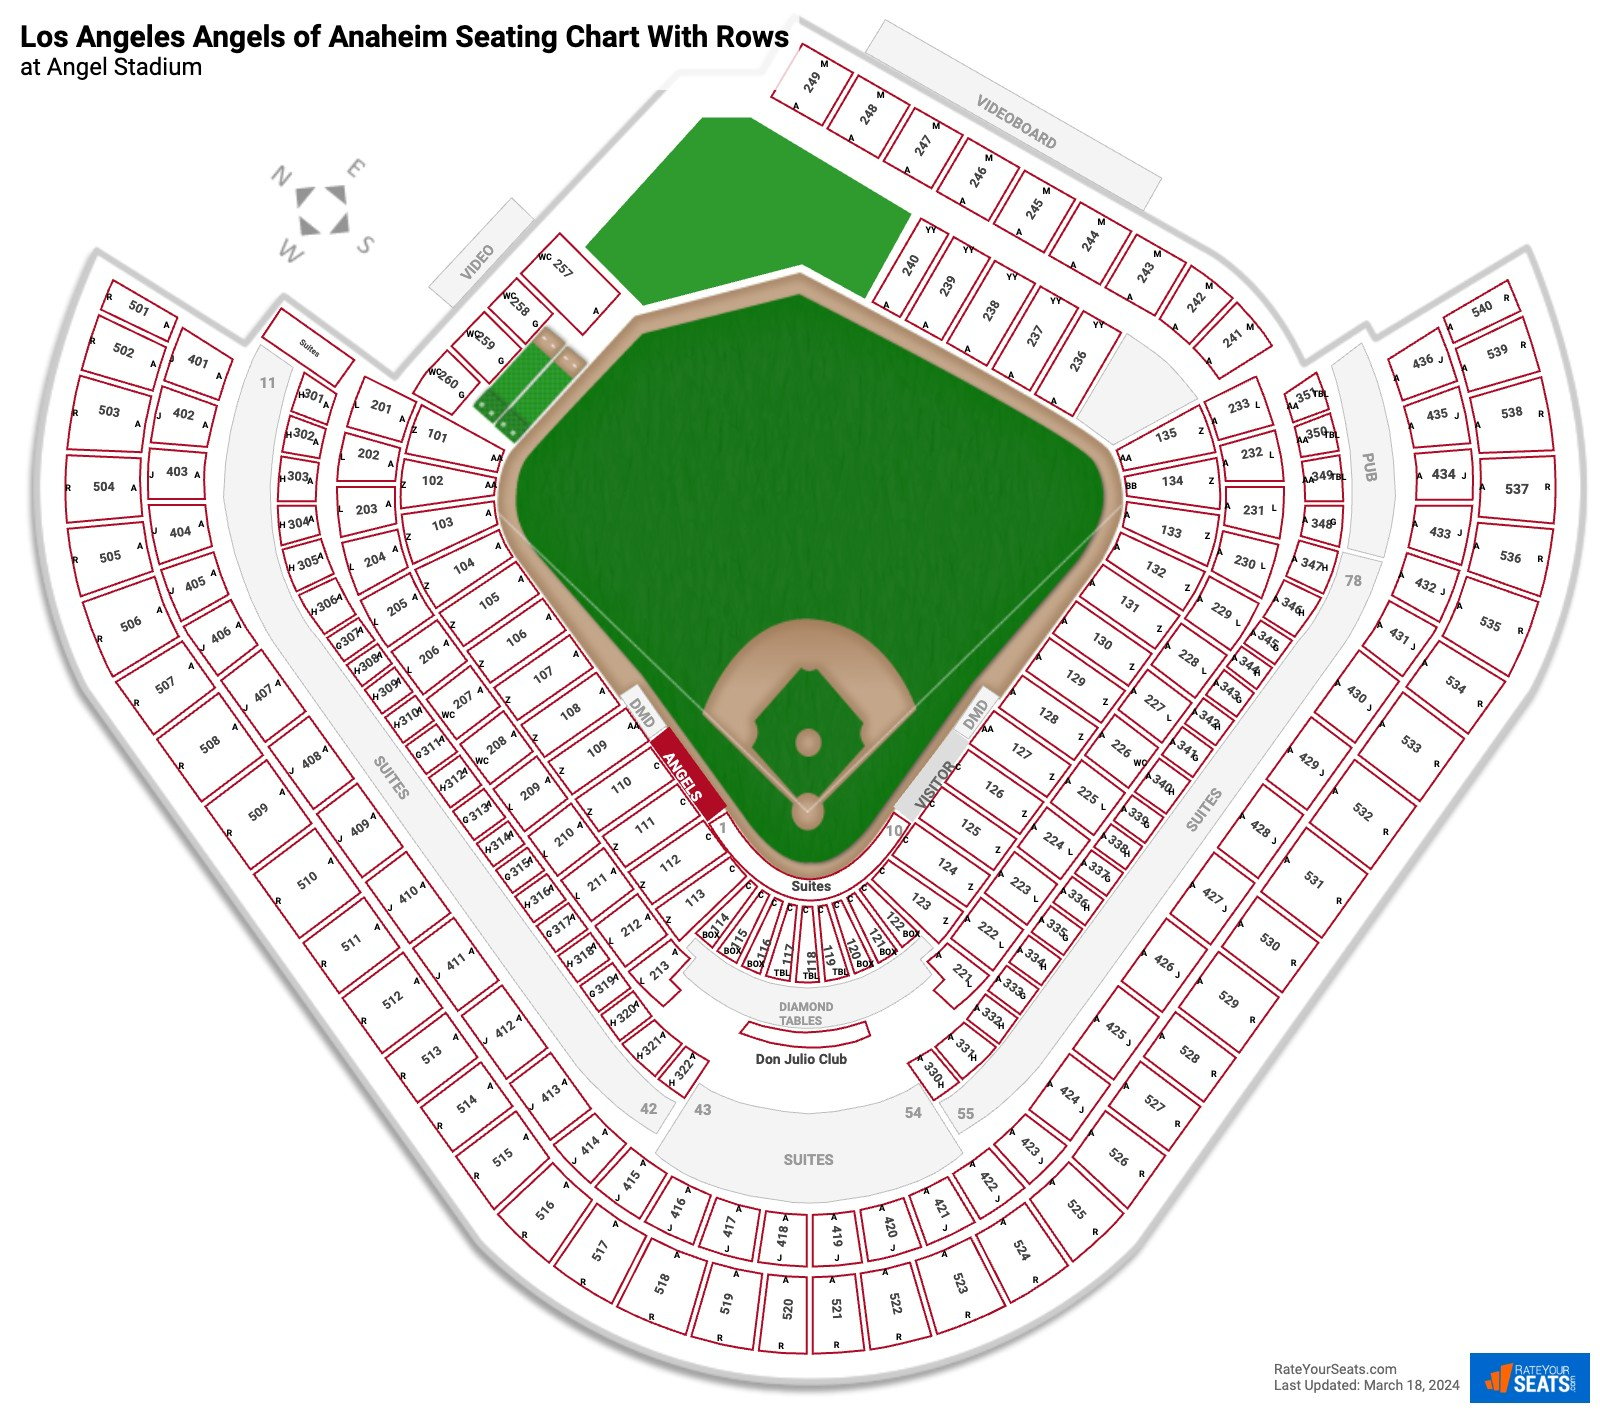 Buy Los Angeles Angels Tickets Online - Tickets.ca